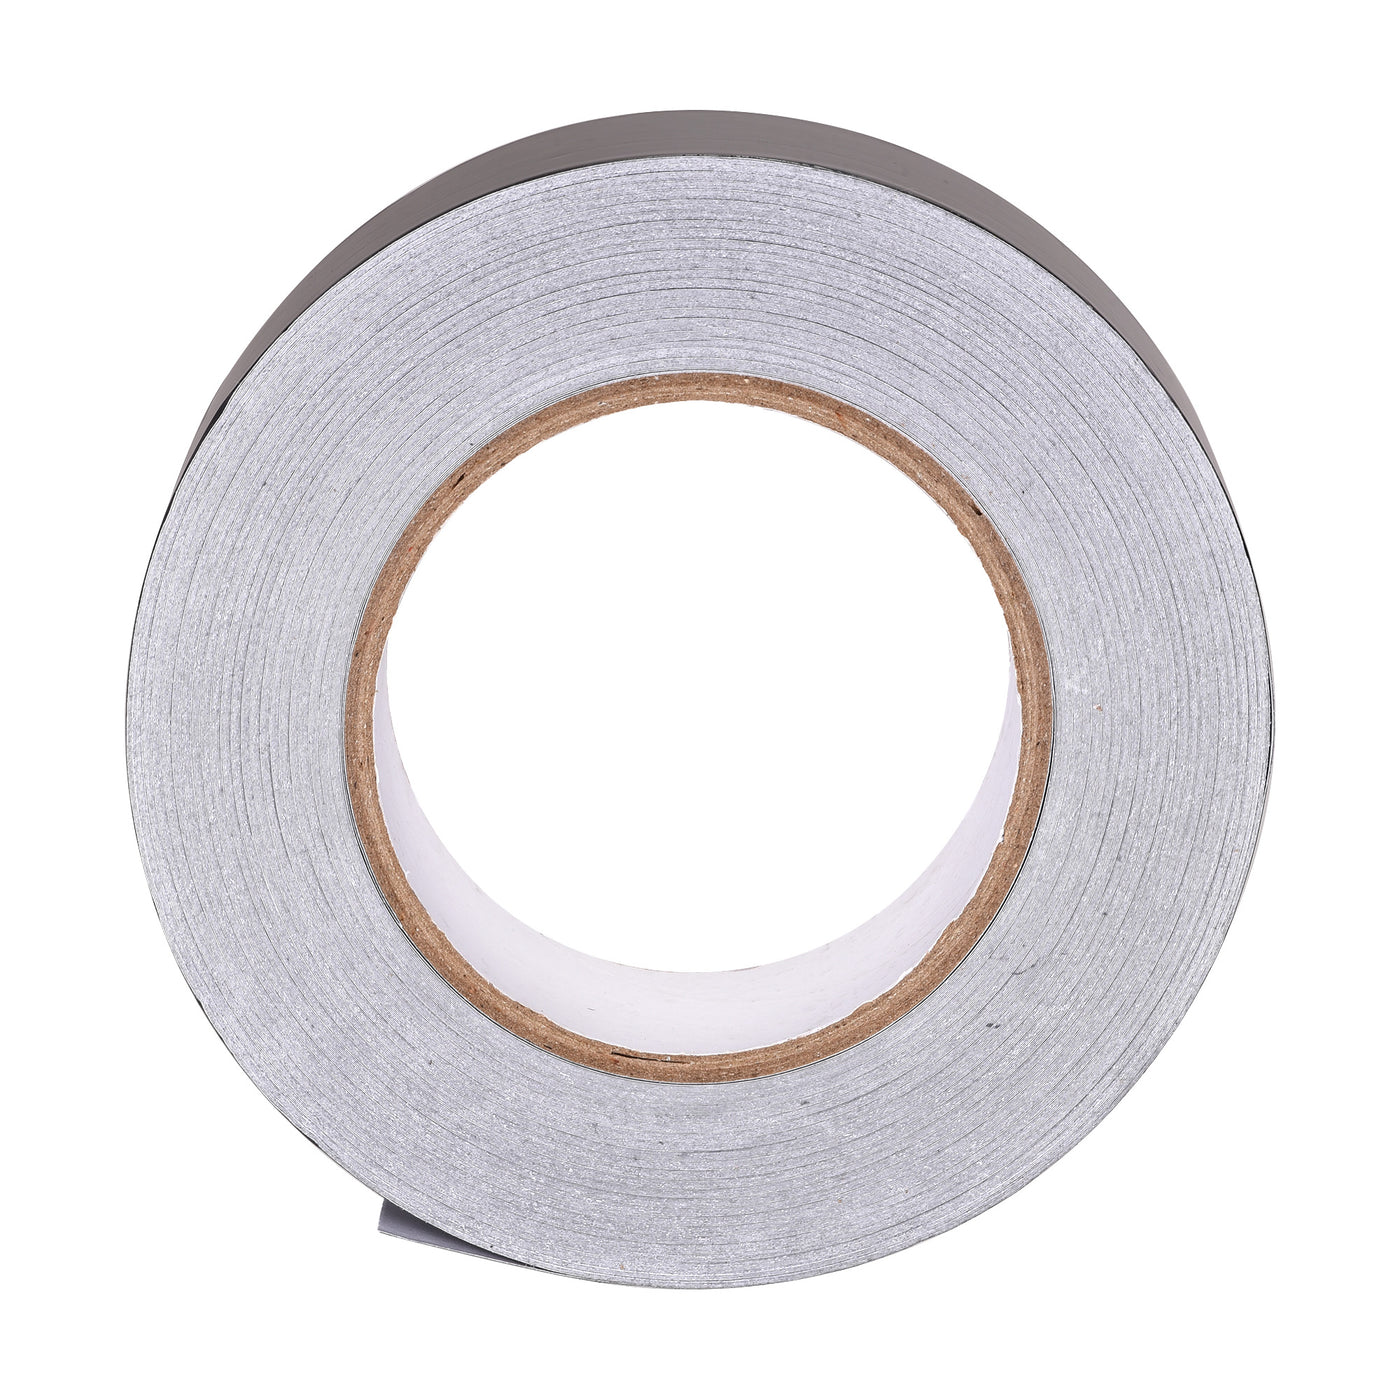 uxcell Uxcell 25mm Aluminum Foil Tape for HVAC, Patching Hot and Blocking light 50m/164ft